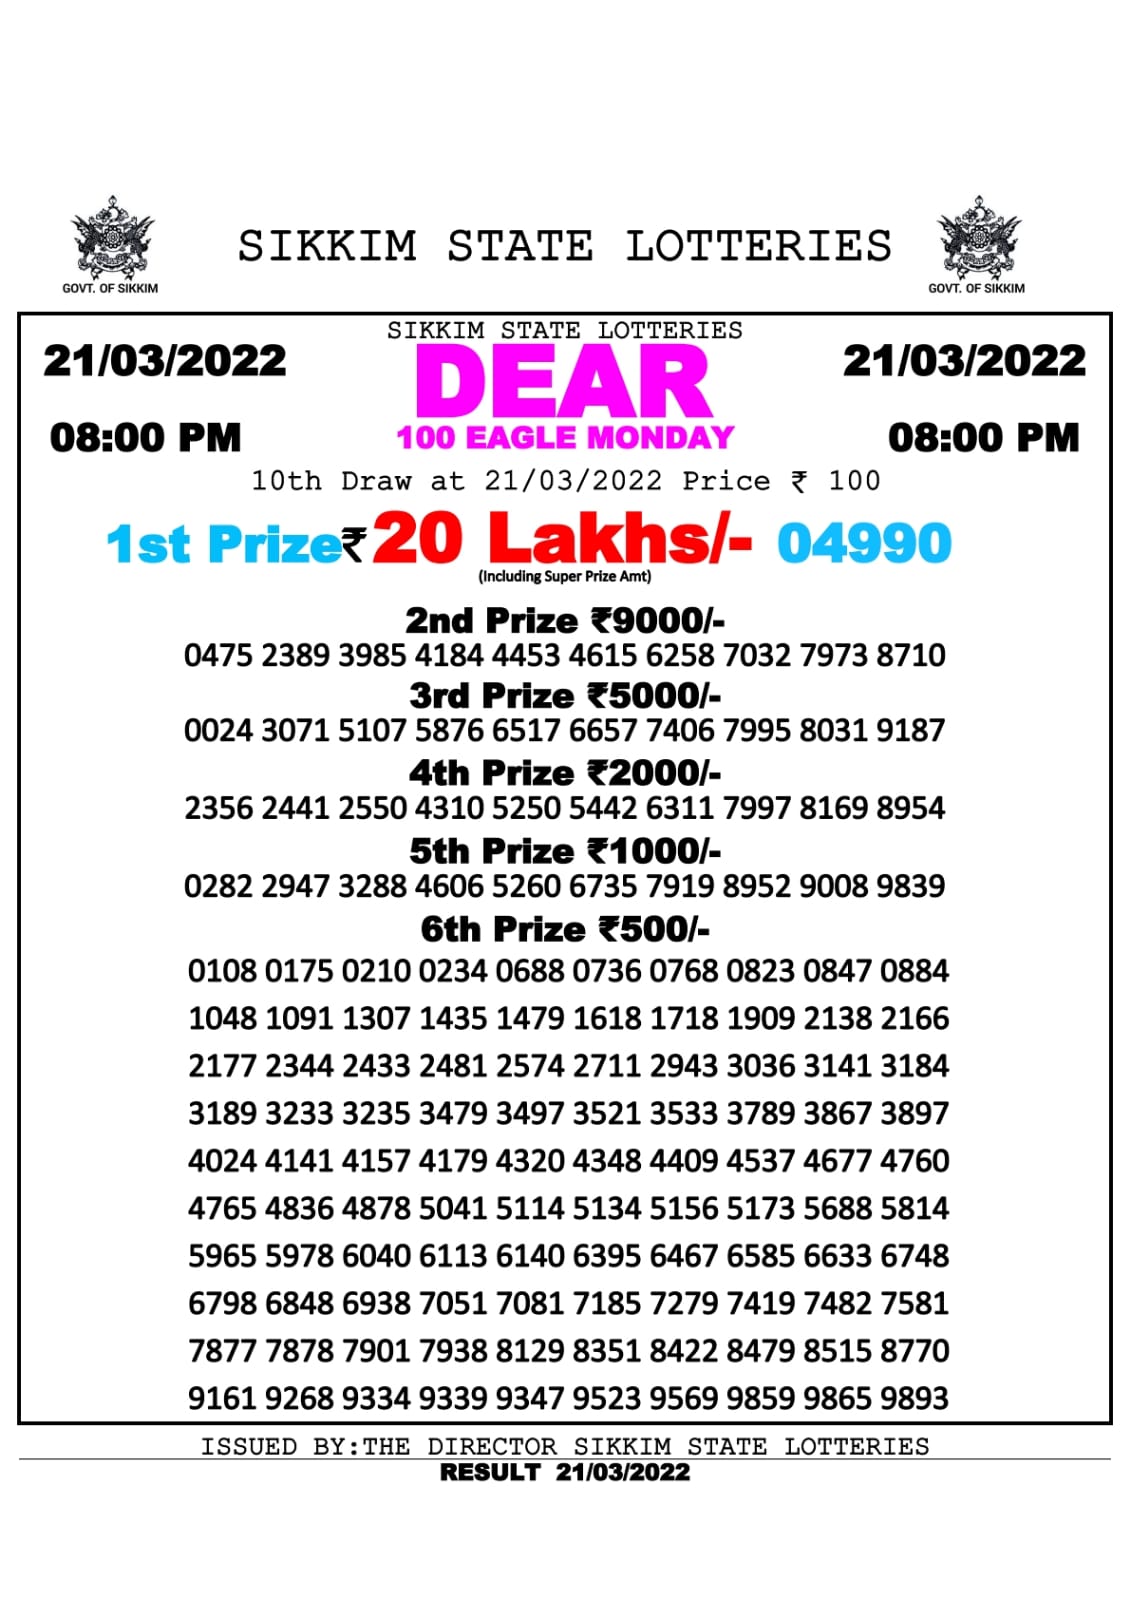 DEAR 100 WEEKLY RESULT 8.00PM 21.03.2022